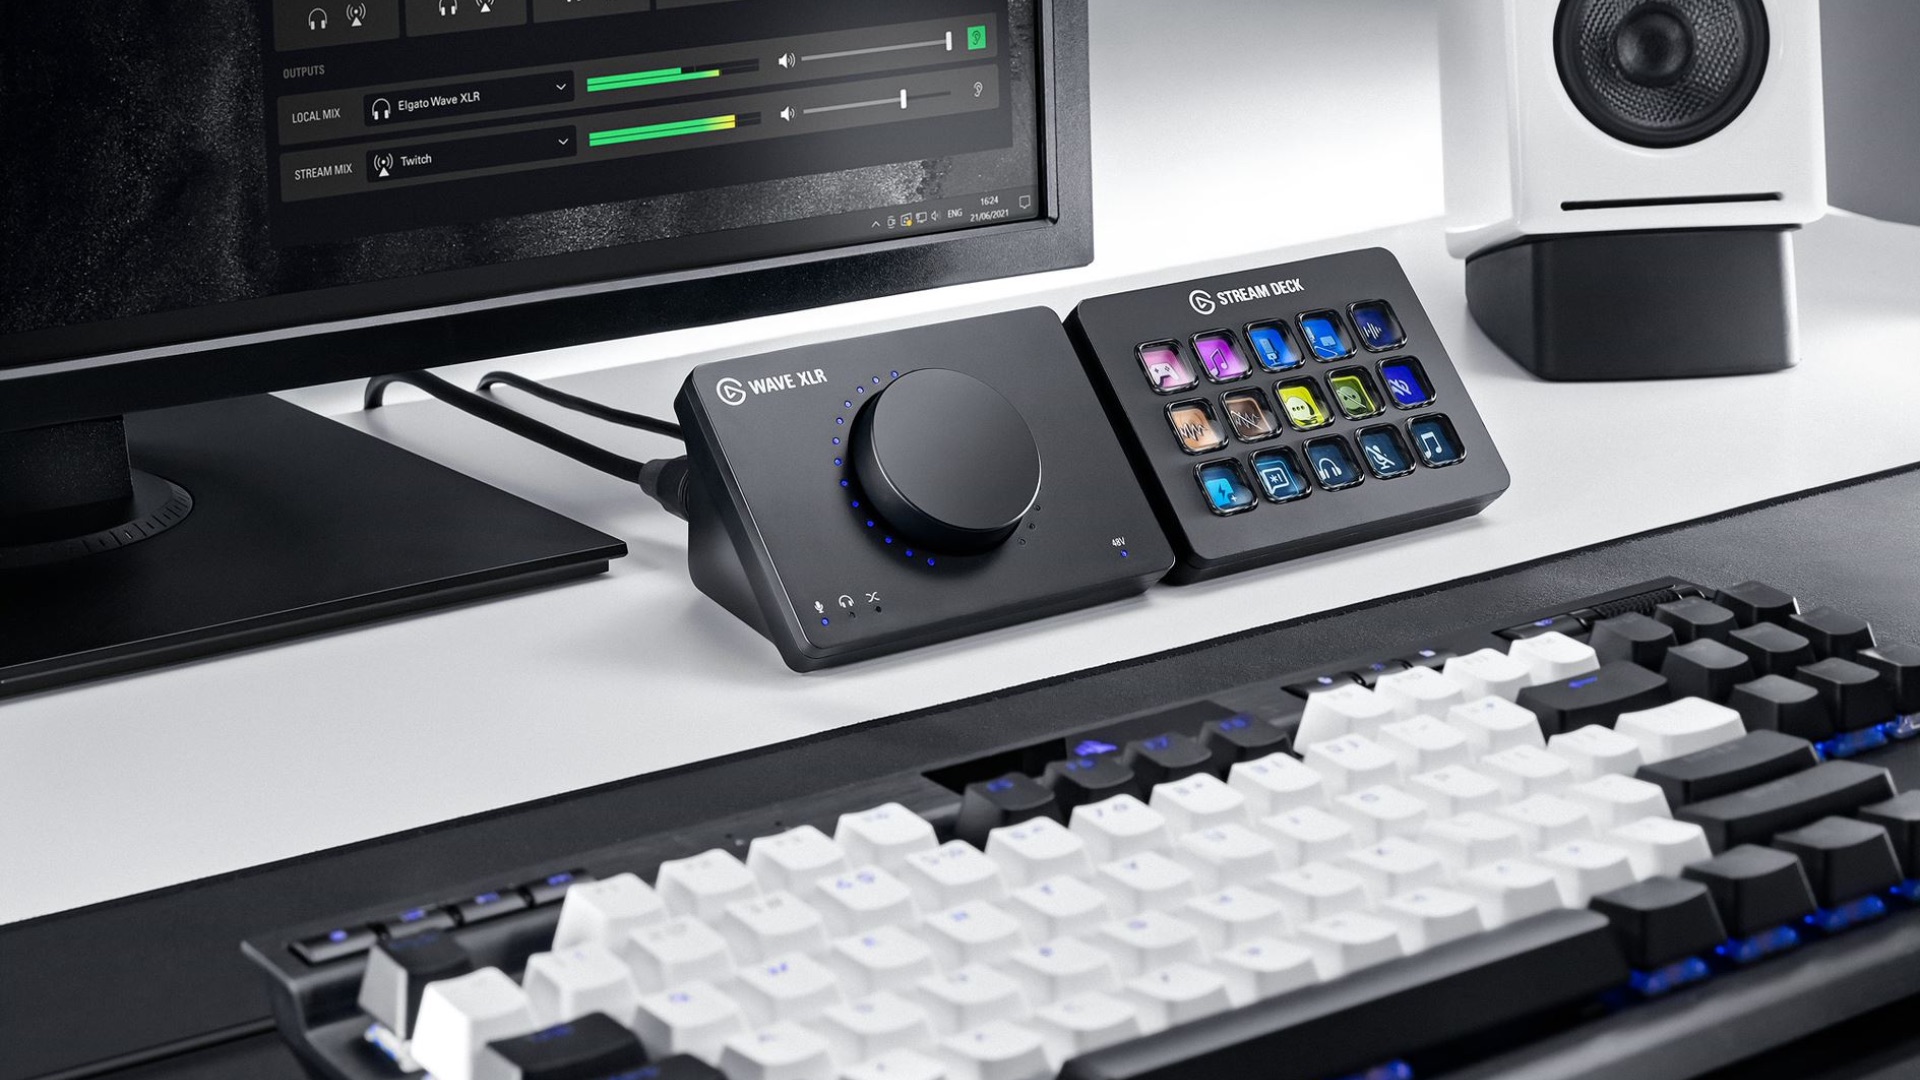 Elgato's Stream Deck MK.2 control surface hits Amazon low at $120